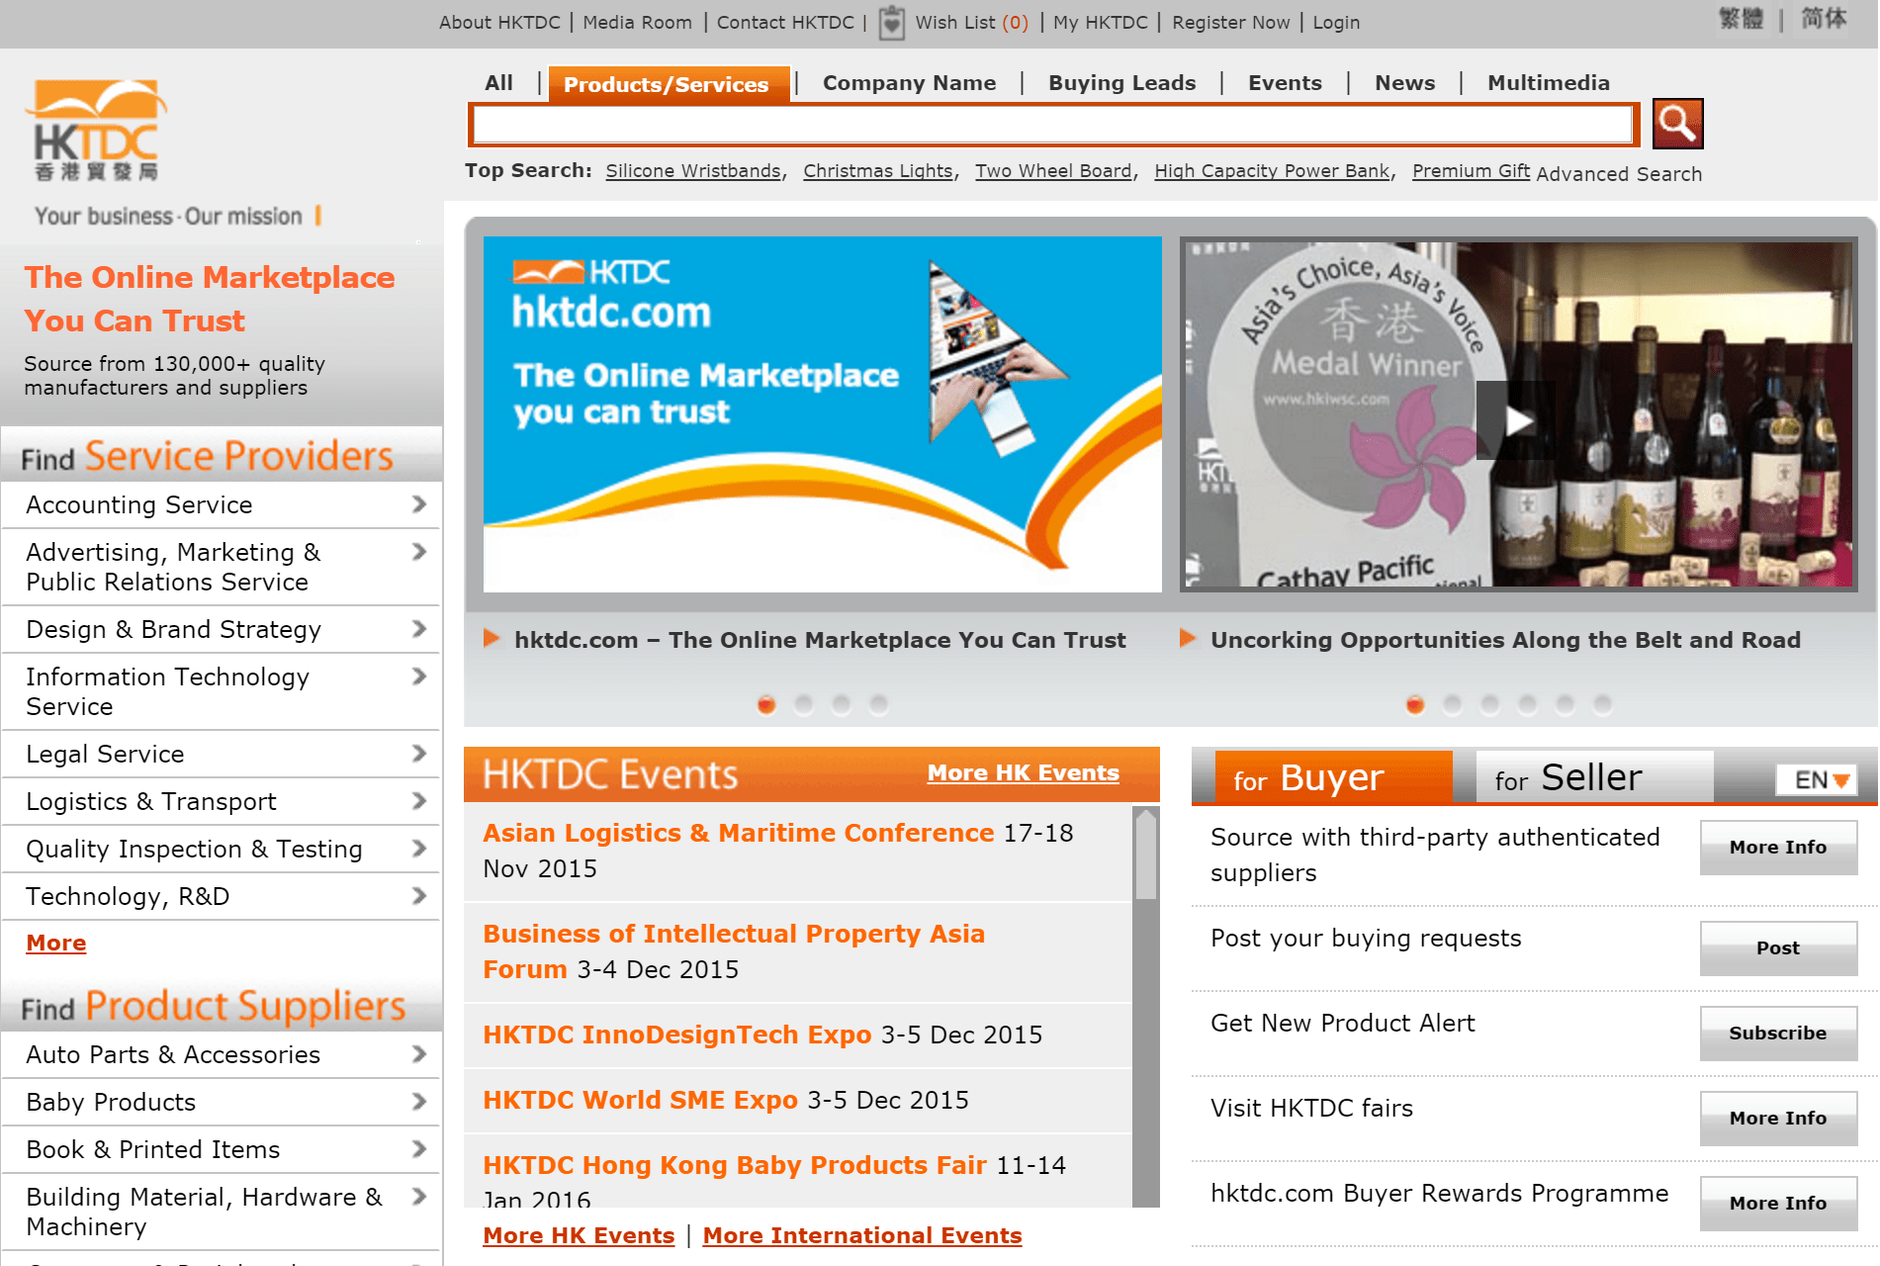 Amazon Private Label suppliers on the homepage of HKTDC